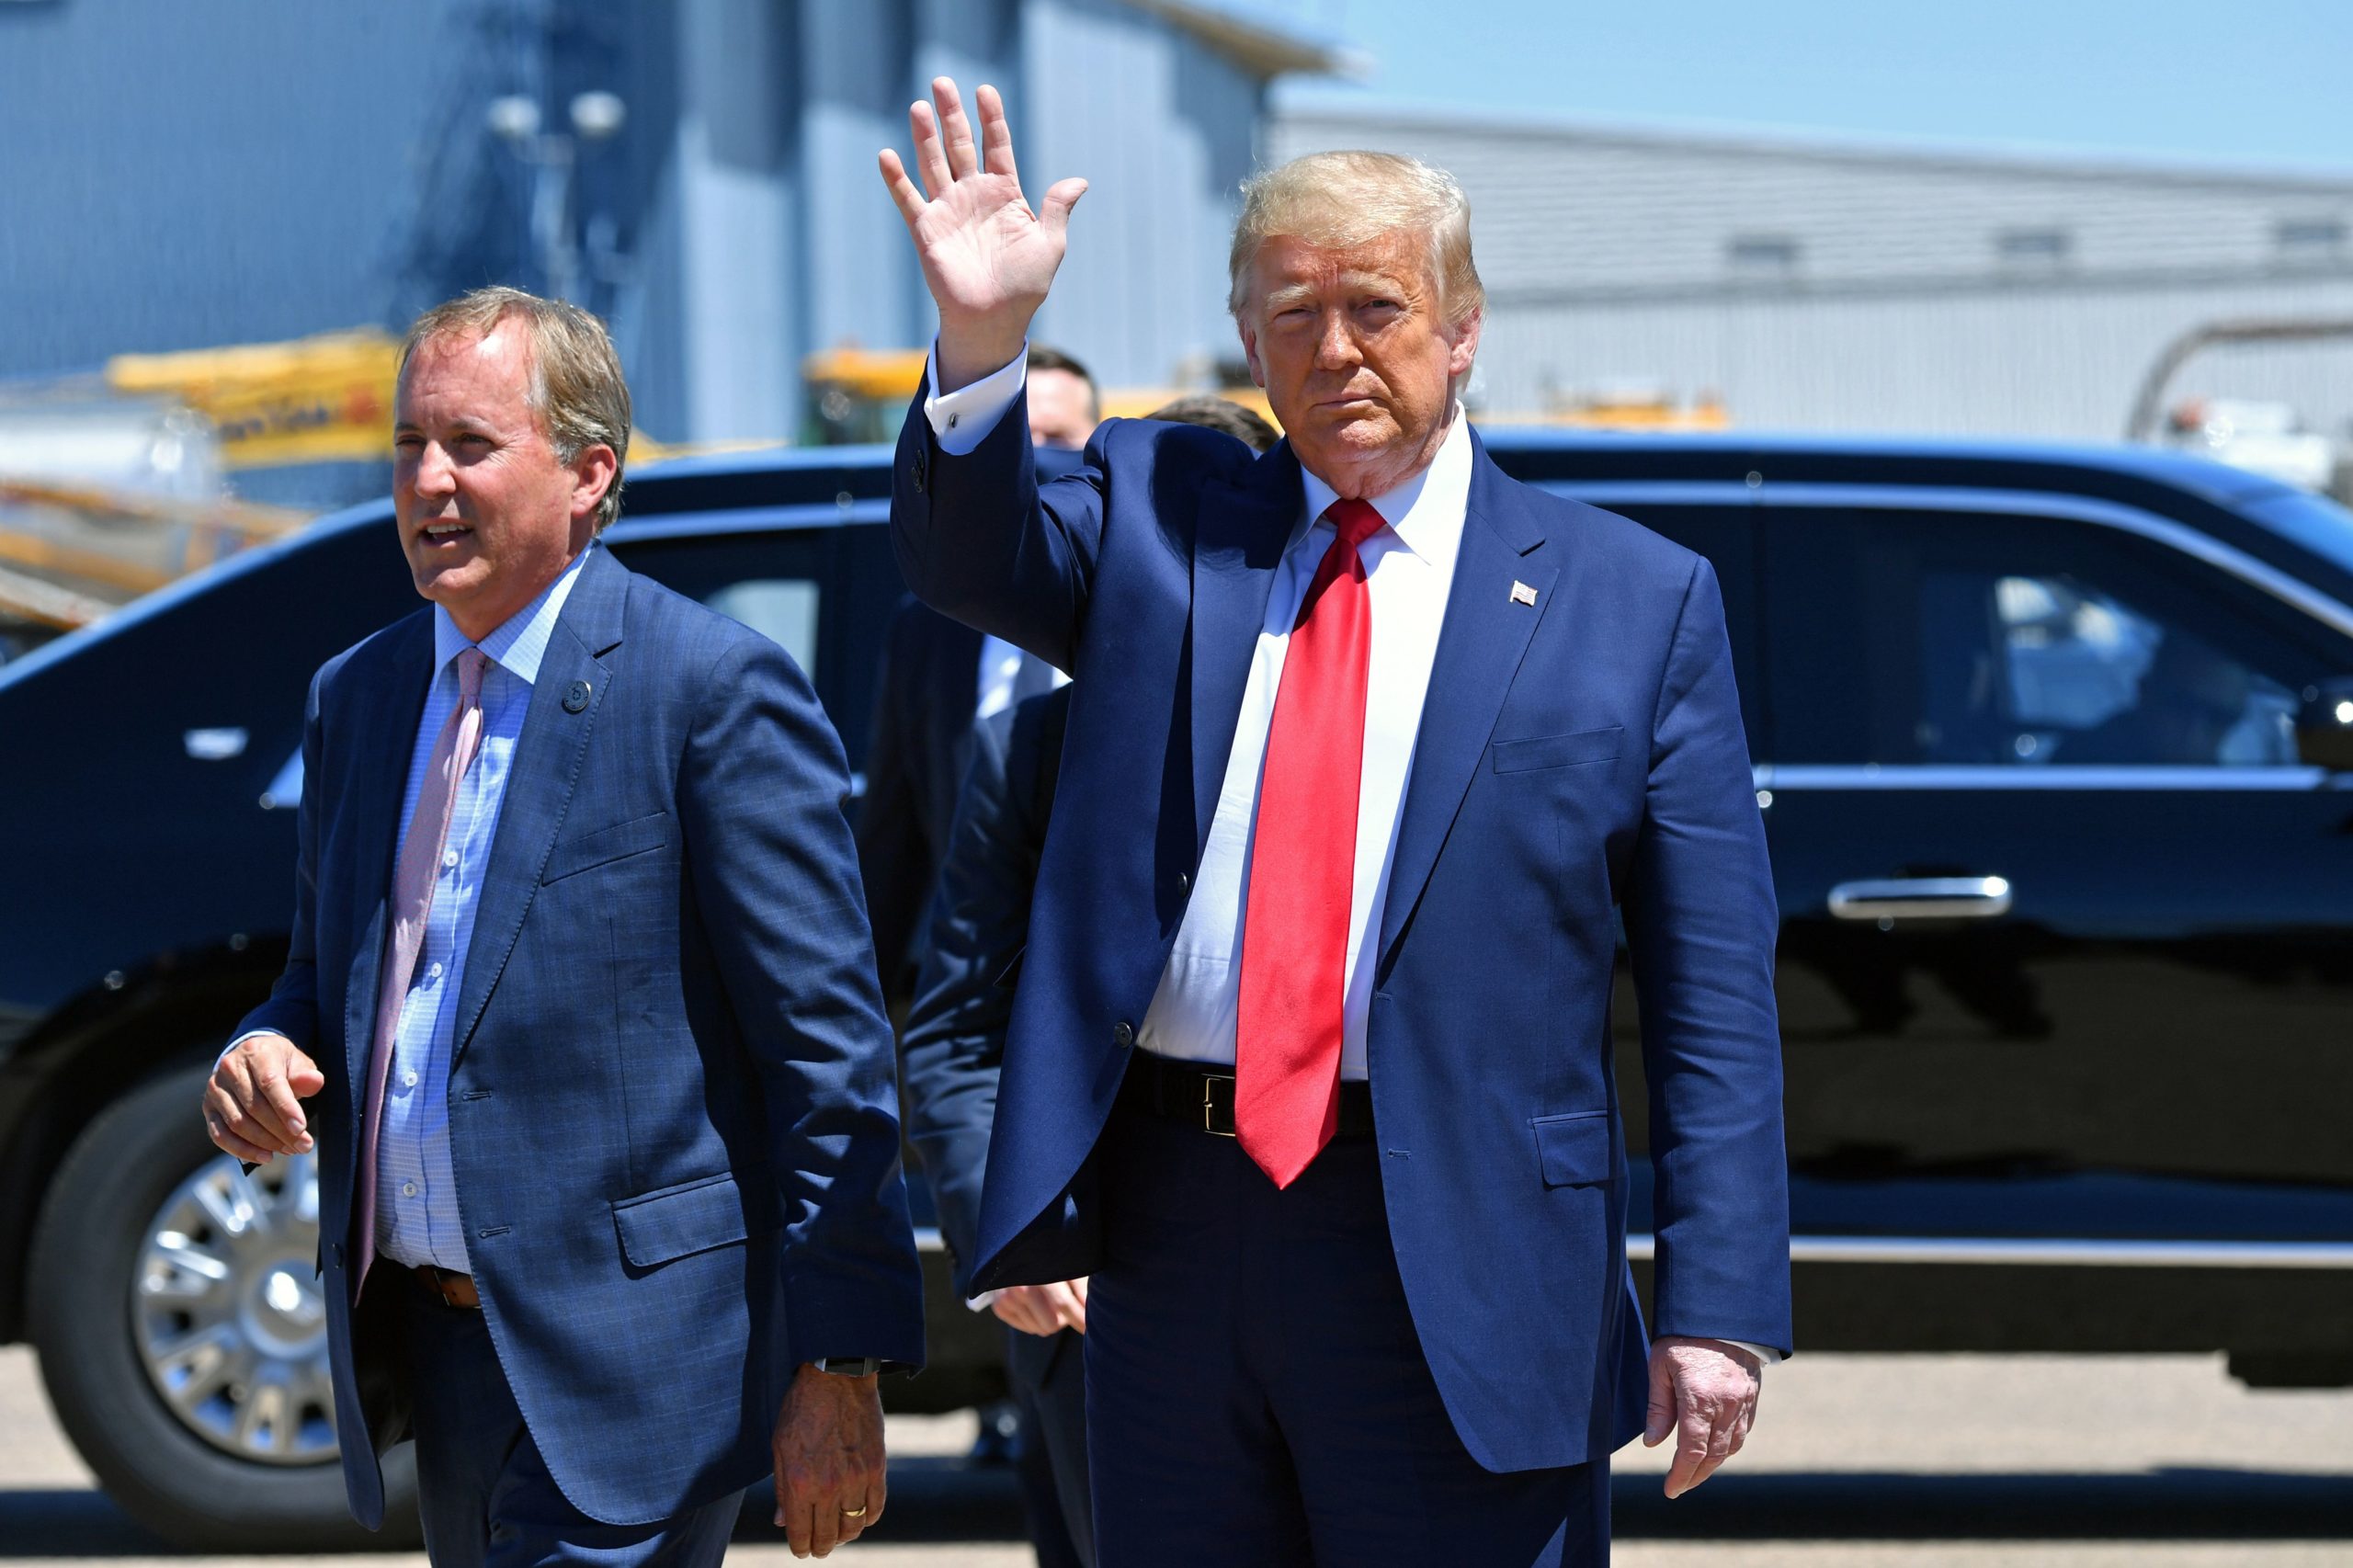 US President Donald Trump waves upon arrival, alongside Attorney General of Texas Ken Paxton (L) in Dallas, Texas, on June 11, 2020, where he will host a roundtable with faith leaders and small business owners. (Photo by Nicholas Kamm / AFP) (Photo by NICHOLAS KAMM/AFP via Getty Images)